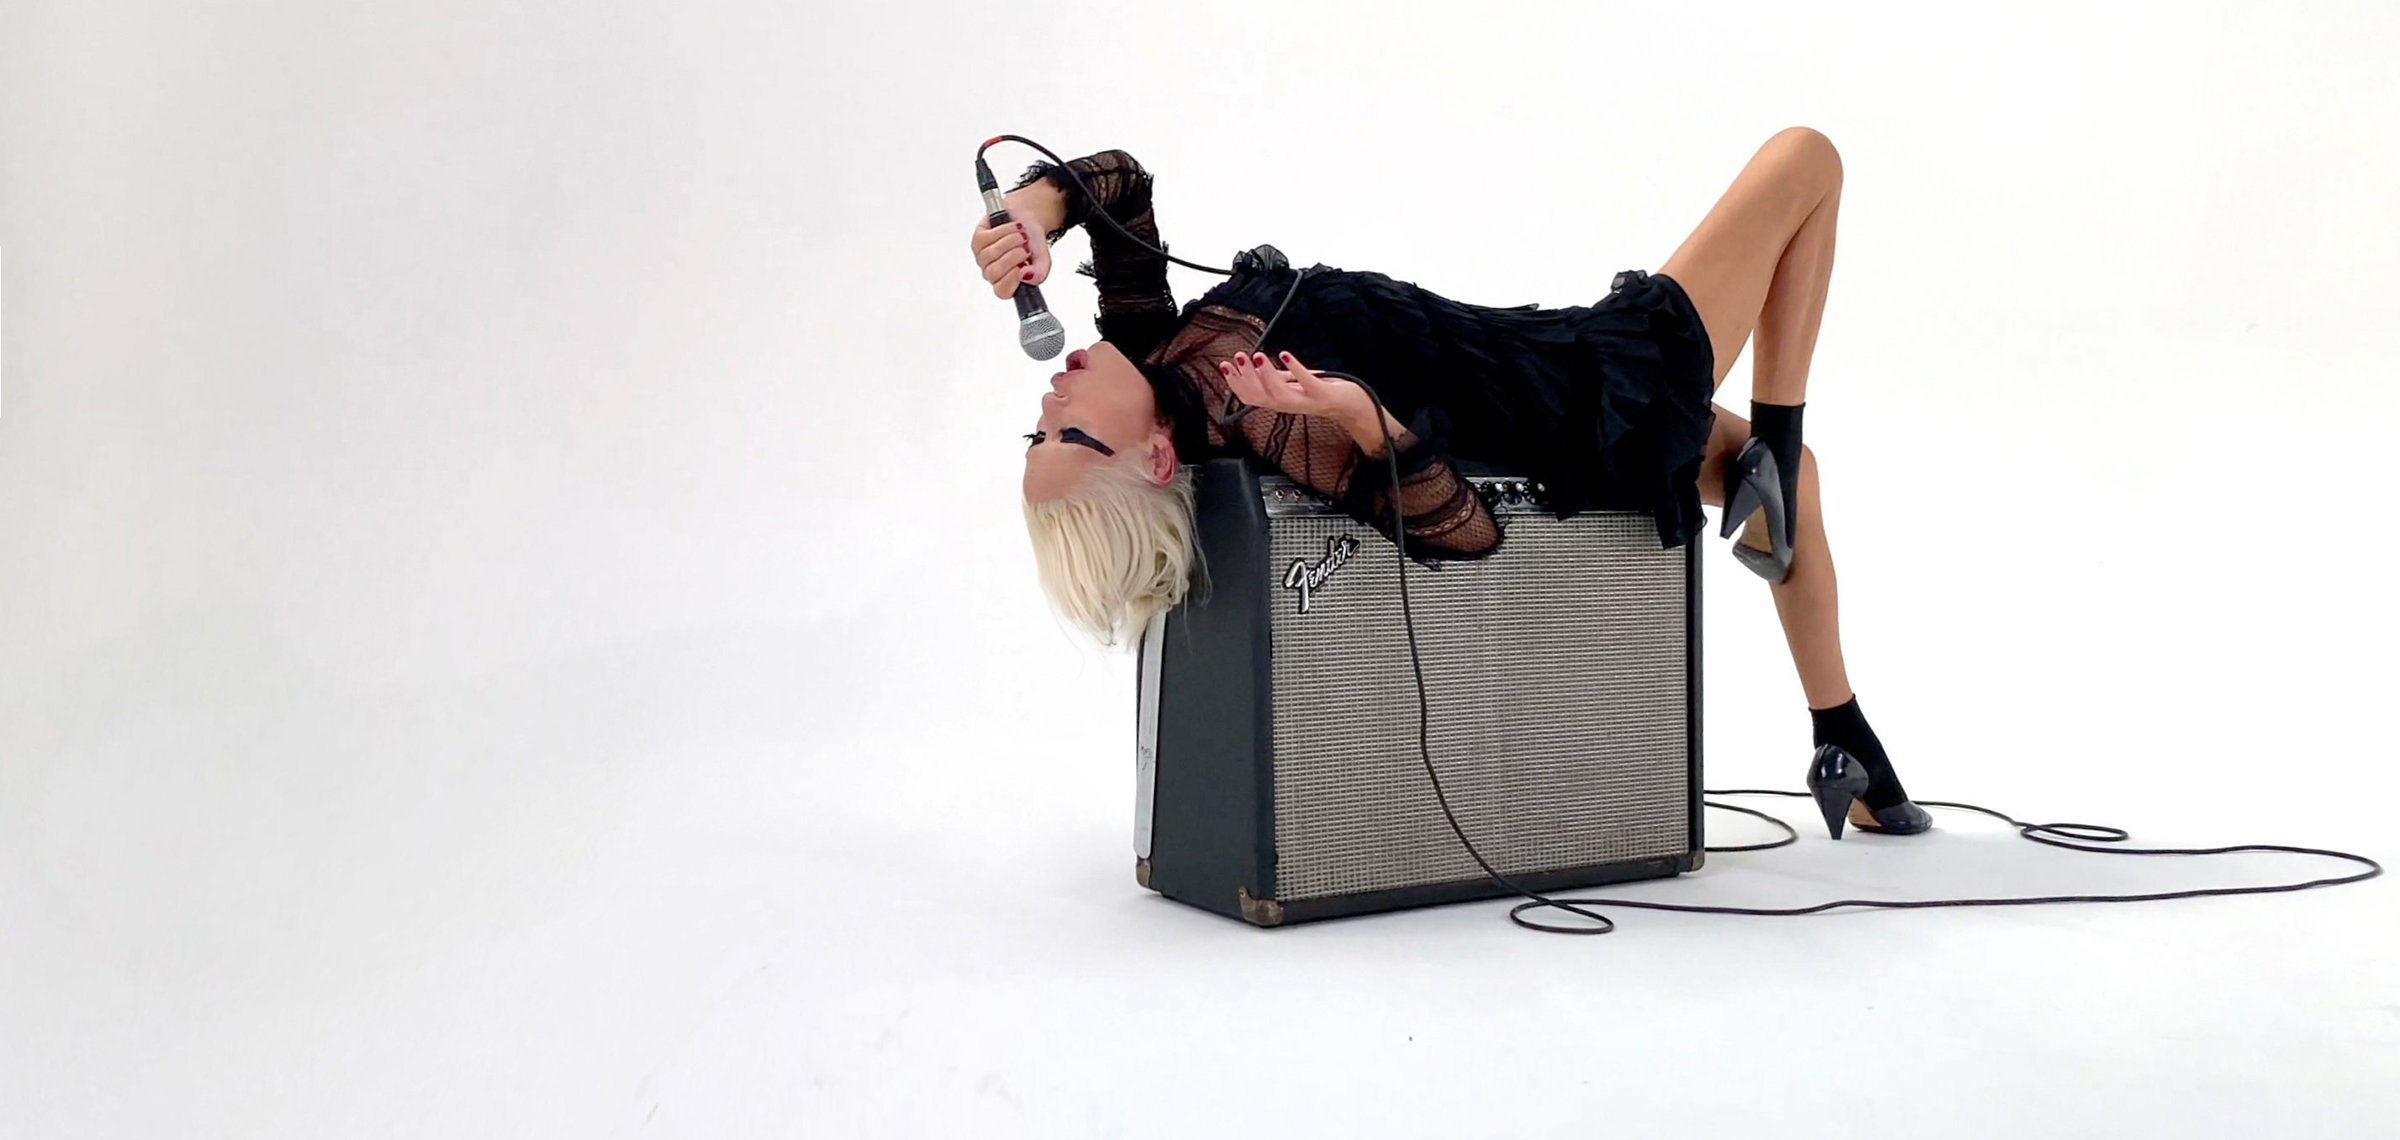 WENDY JAMES shares video for new single ‘The Impression Of Normalcy’ - Watch Now 